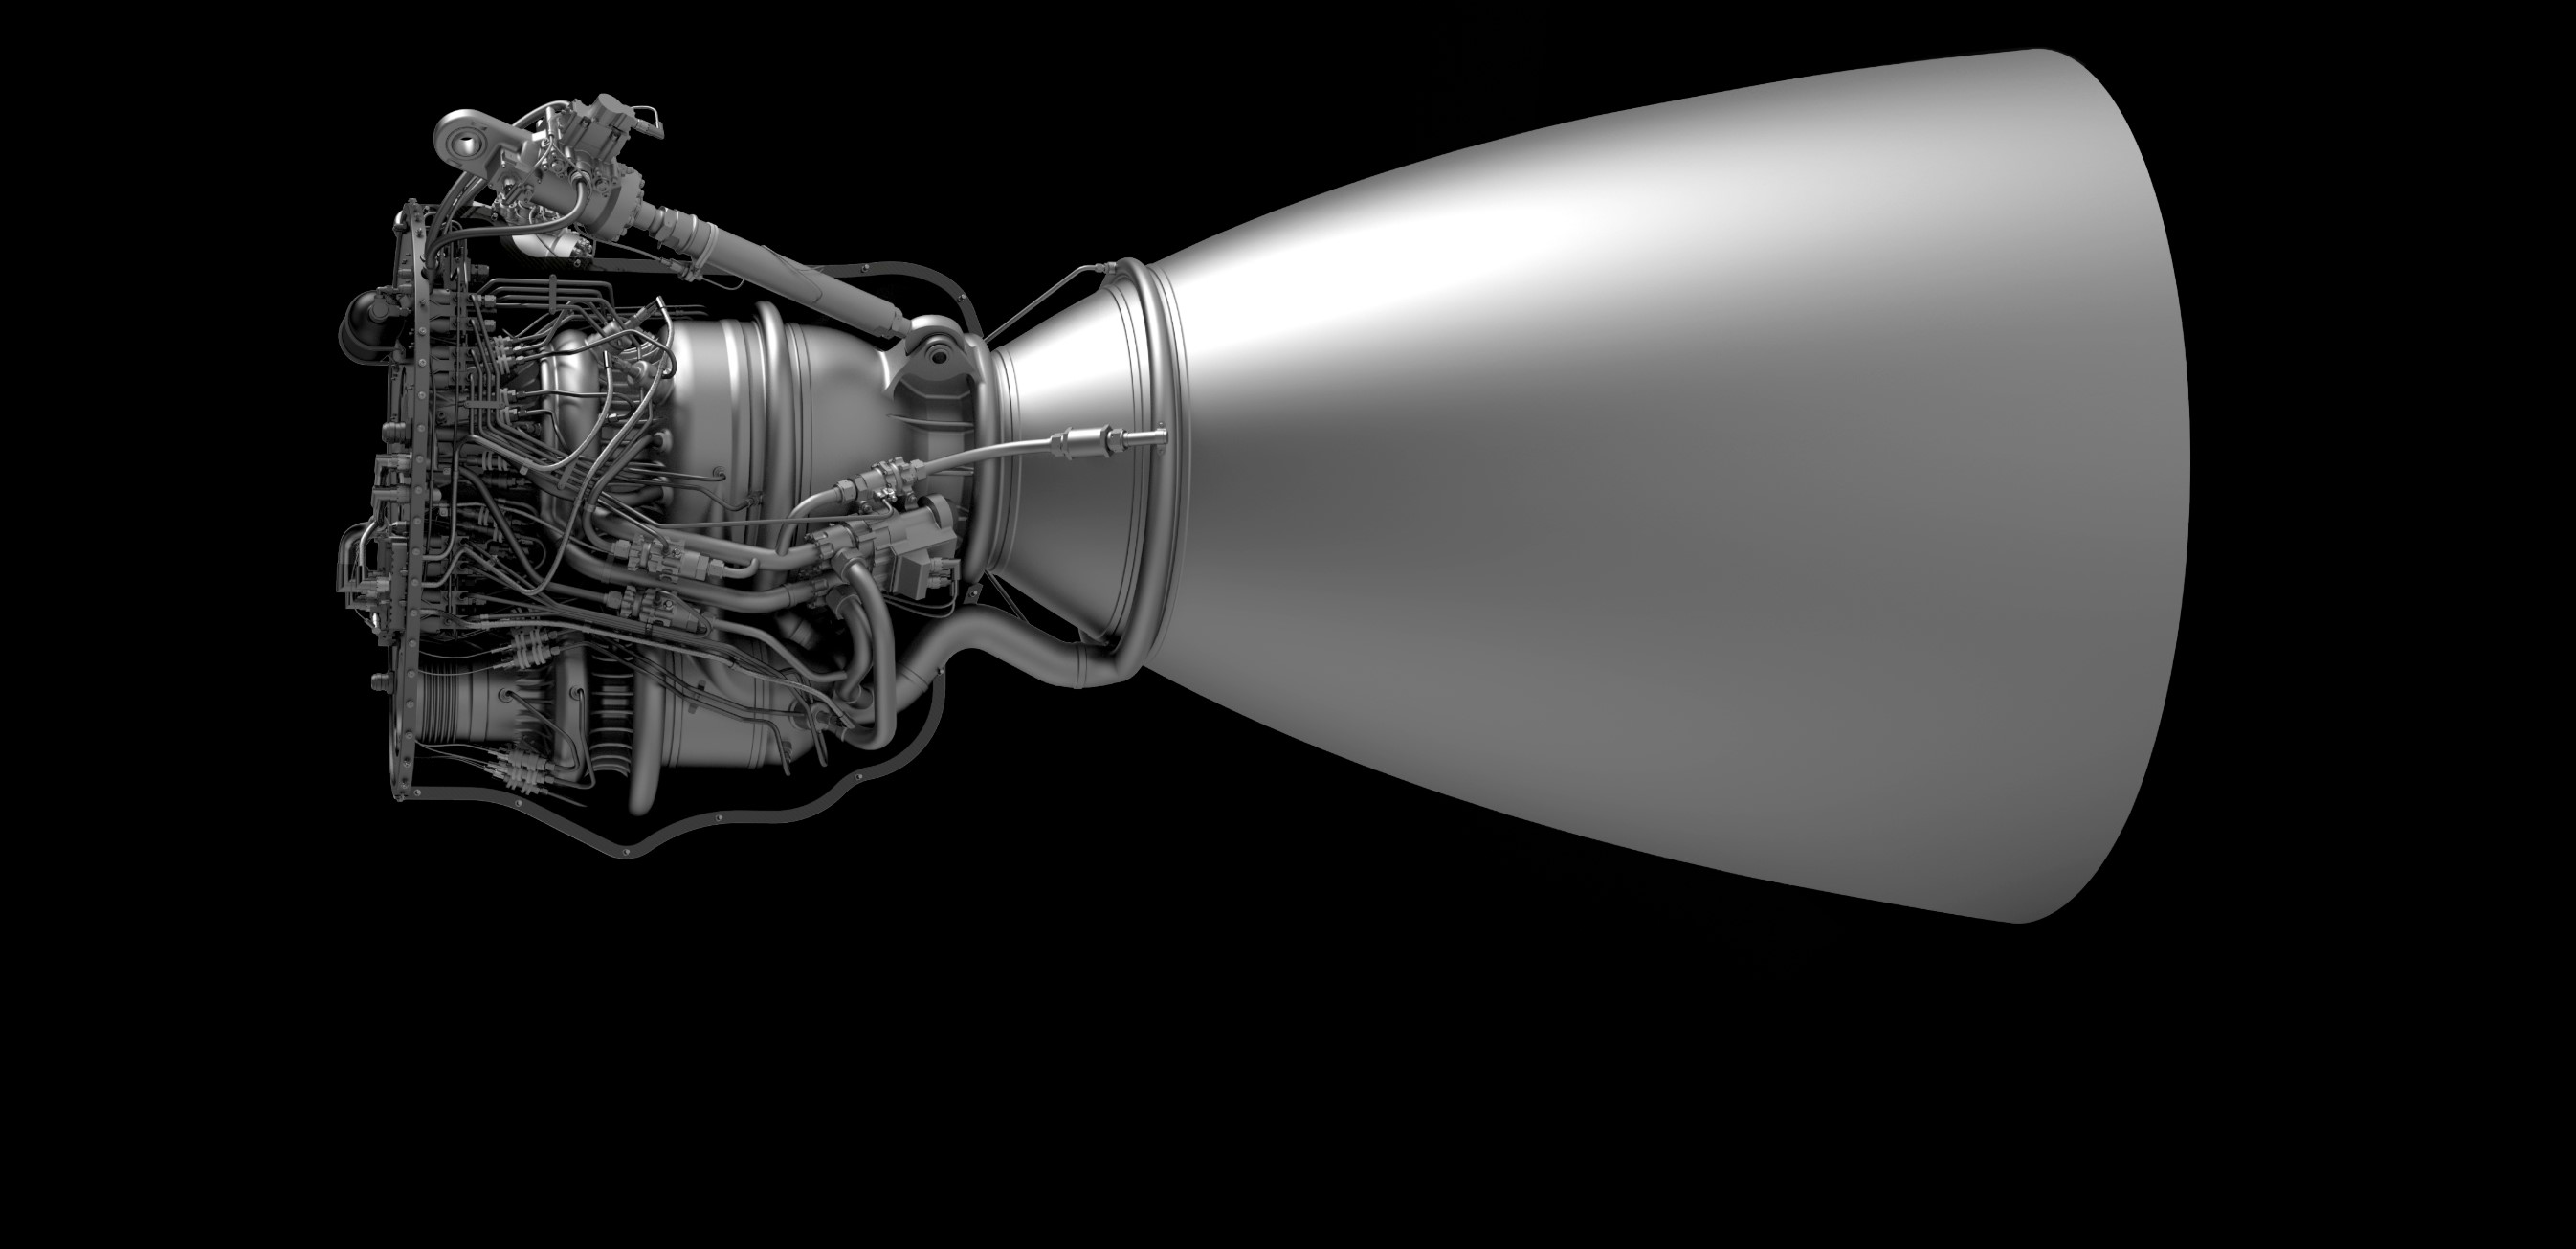 SpaceX's Starship Raptor Vacuum engine plans laid out by CEO Elon Musk